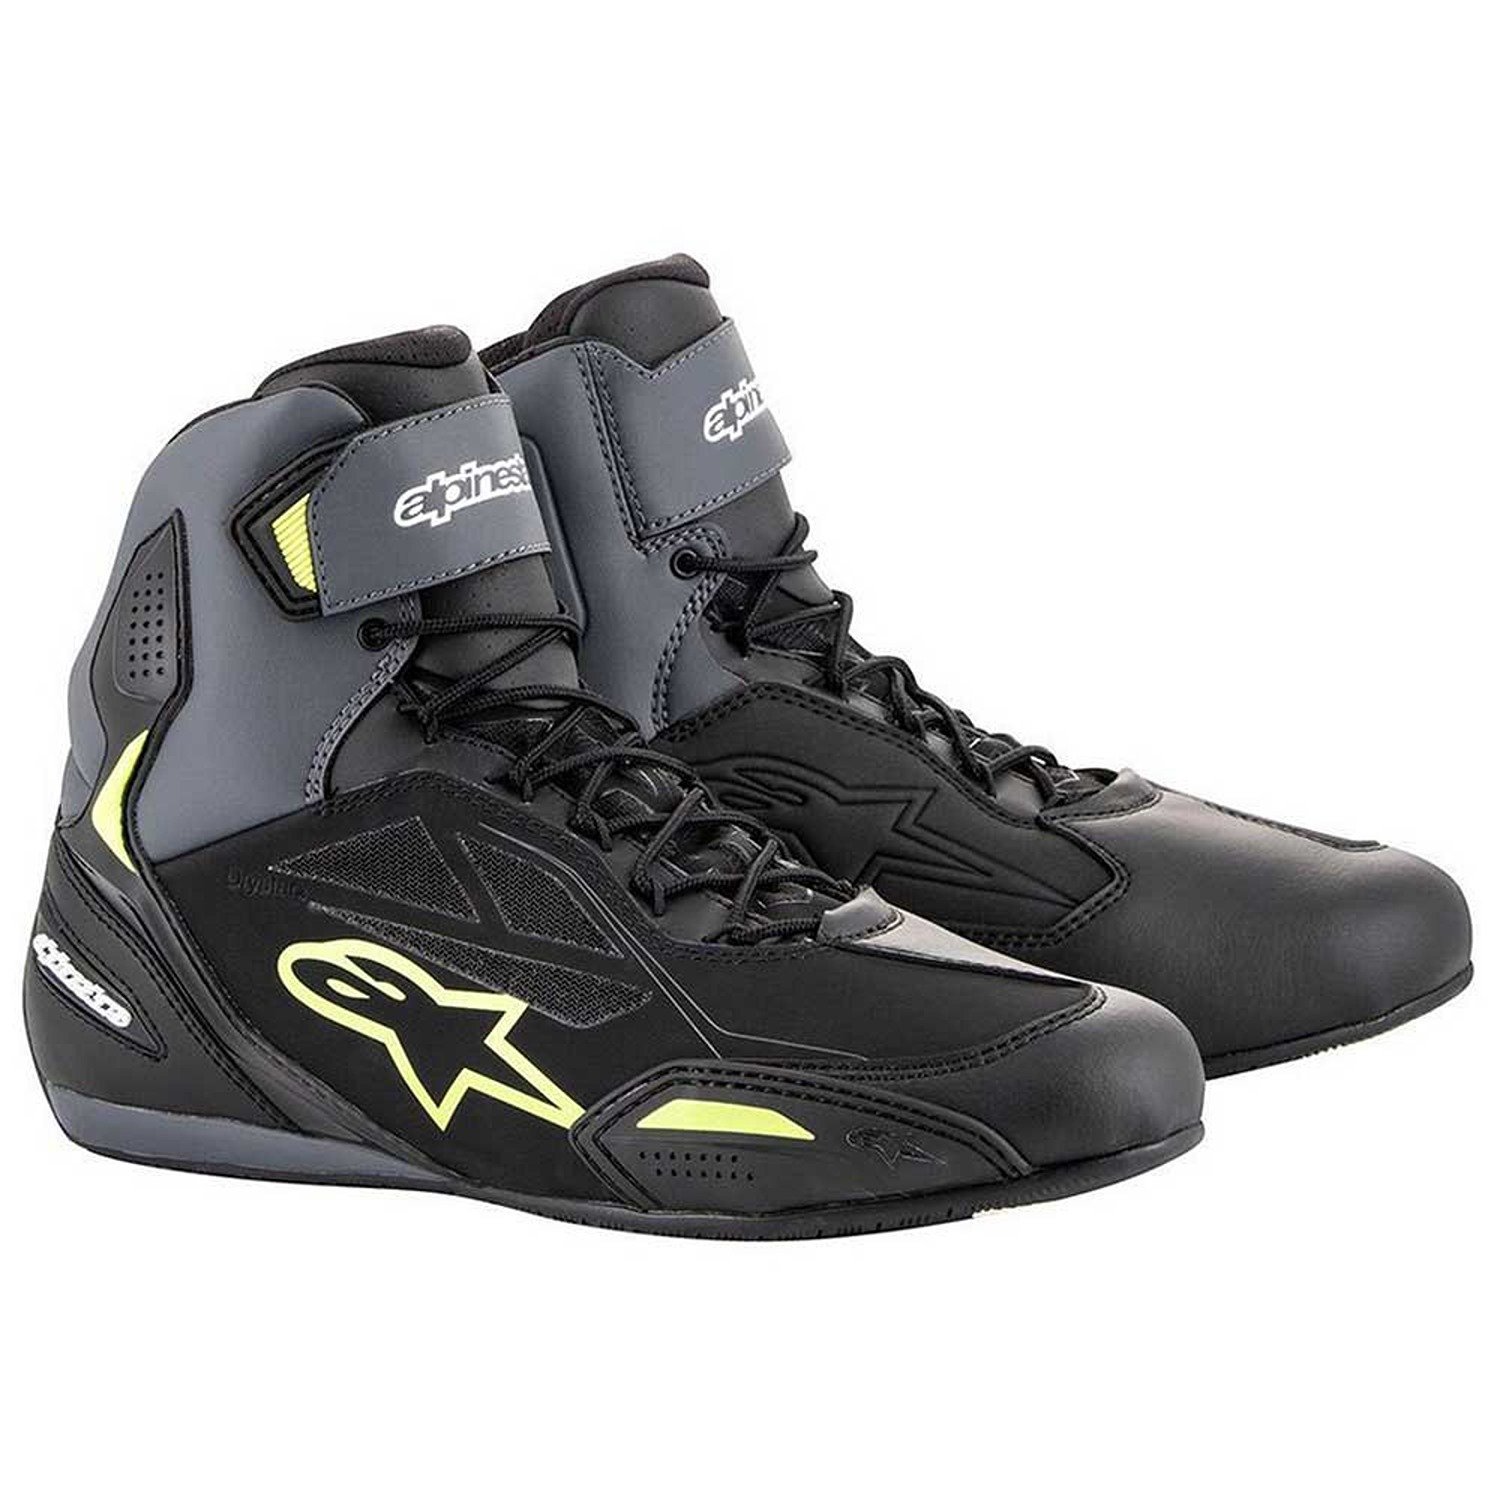 Image of Alpinestars Faster-3 Shoes Black Yellow Fluo Talla US 115